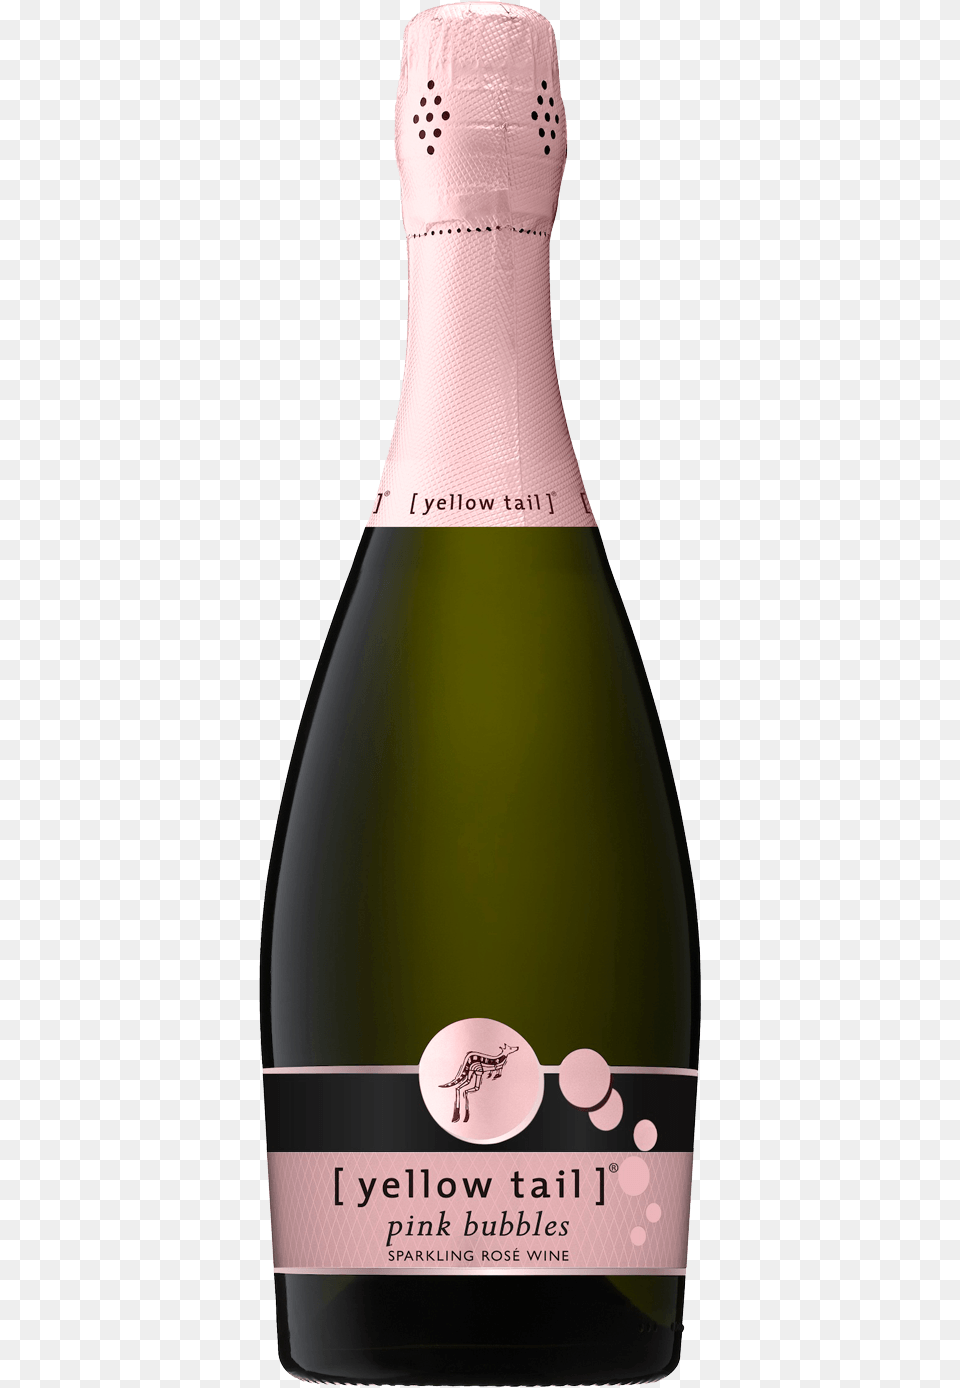 Pink Bubbles Yellow Tail Bubbles Wine, Alcohol, Beverage, Beer, Bottle Png